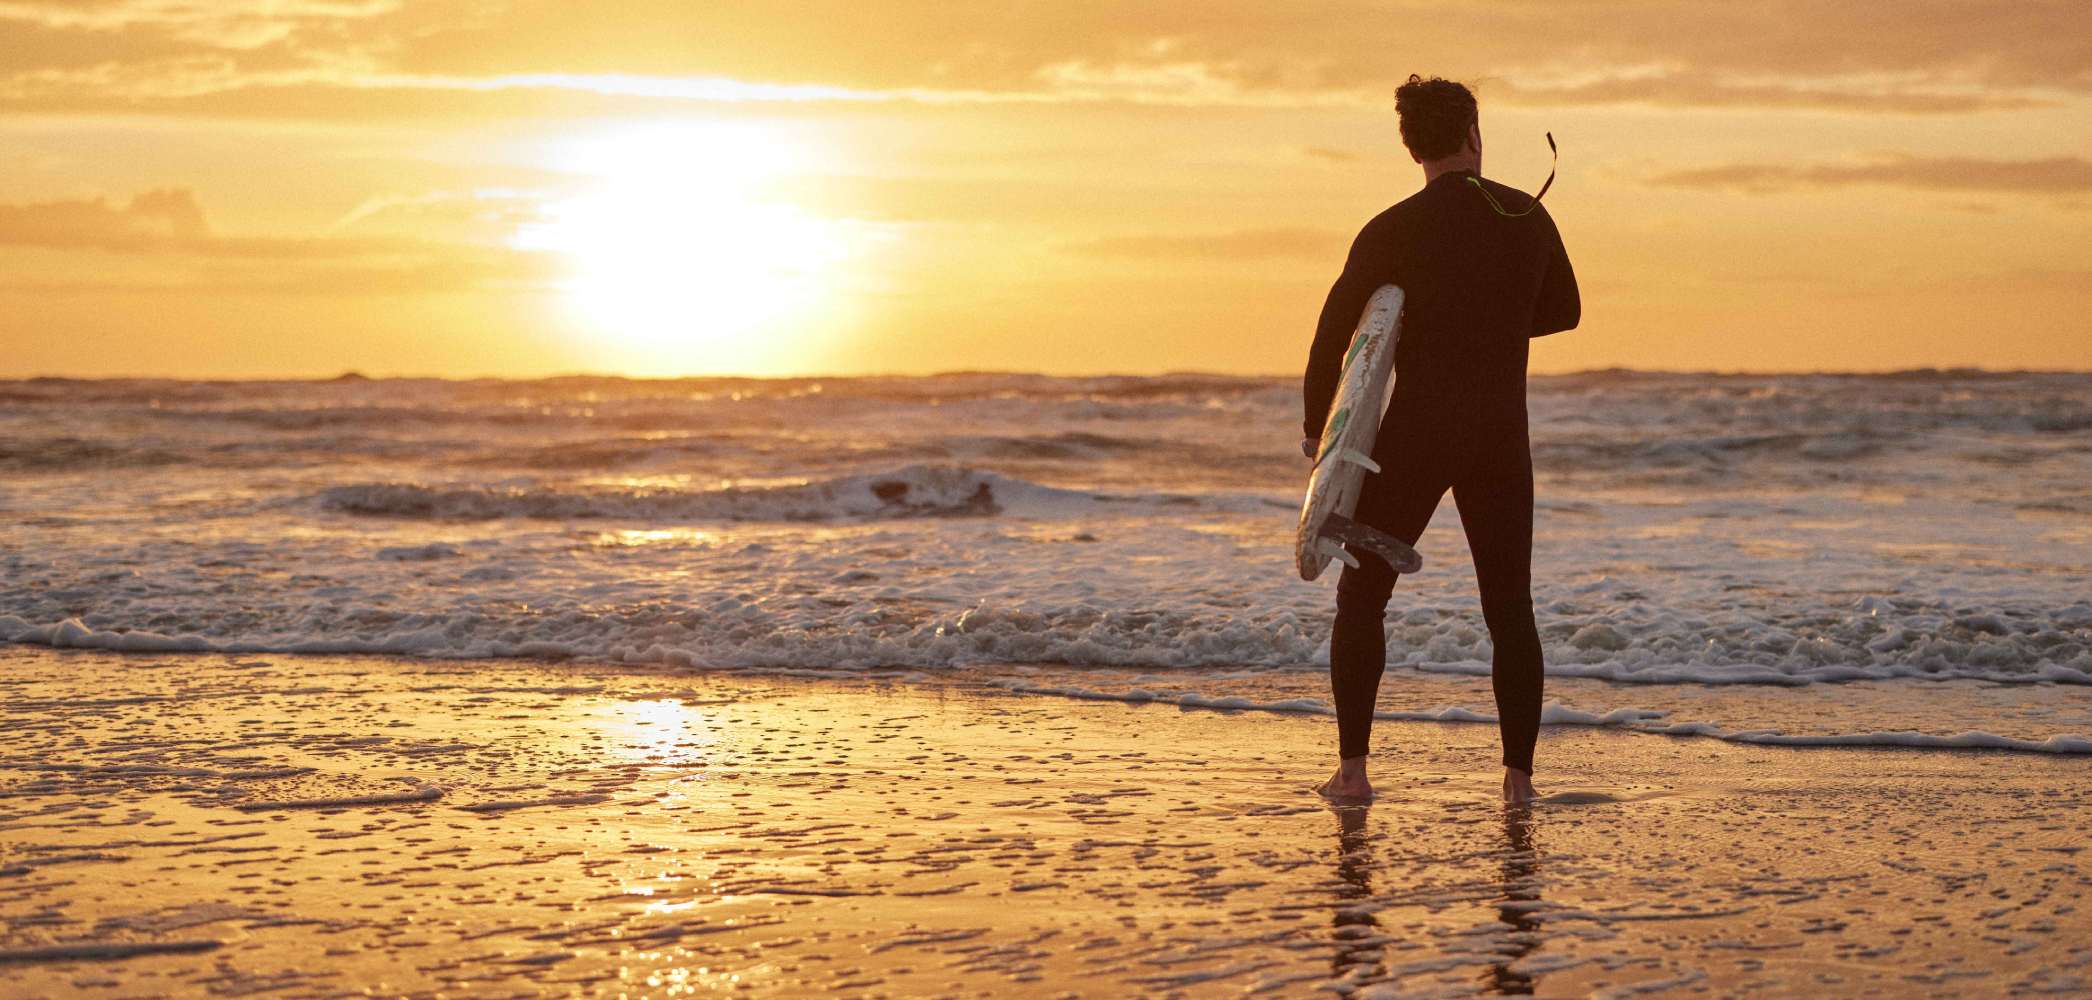 A surfer in his wetsuit analyzing the waves as the sun rises